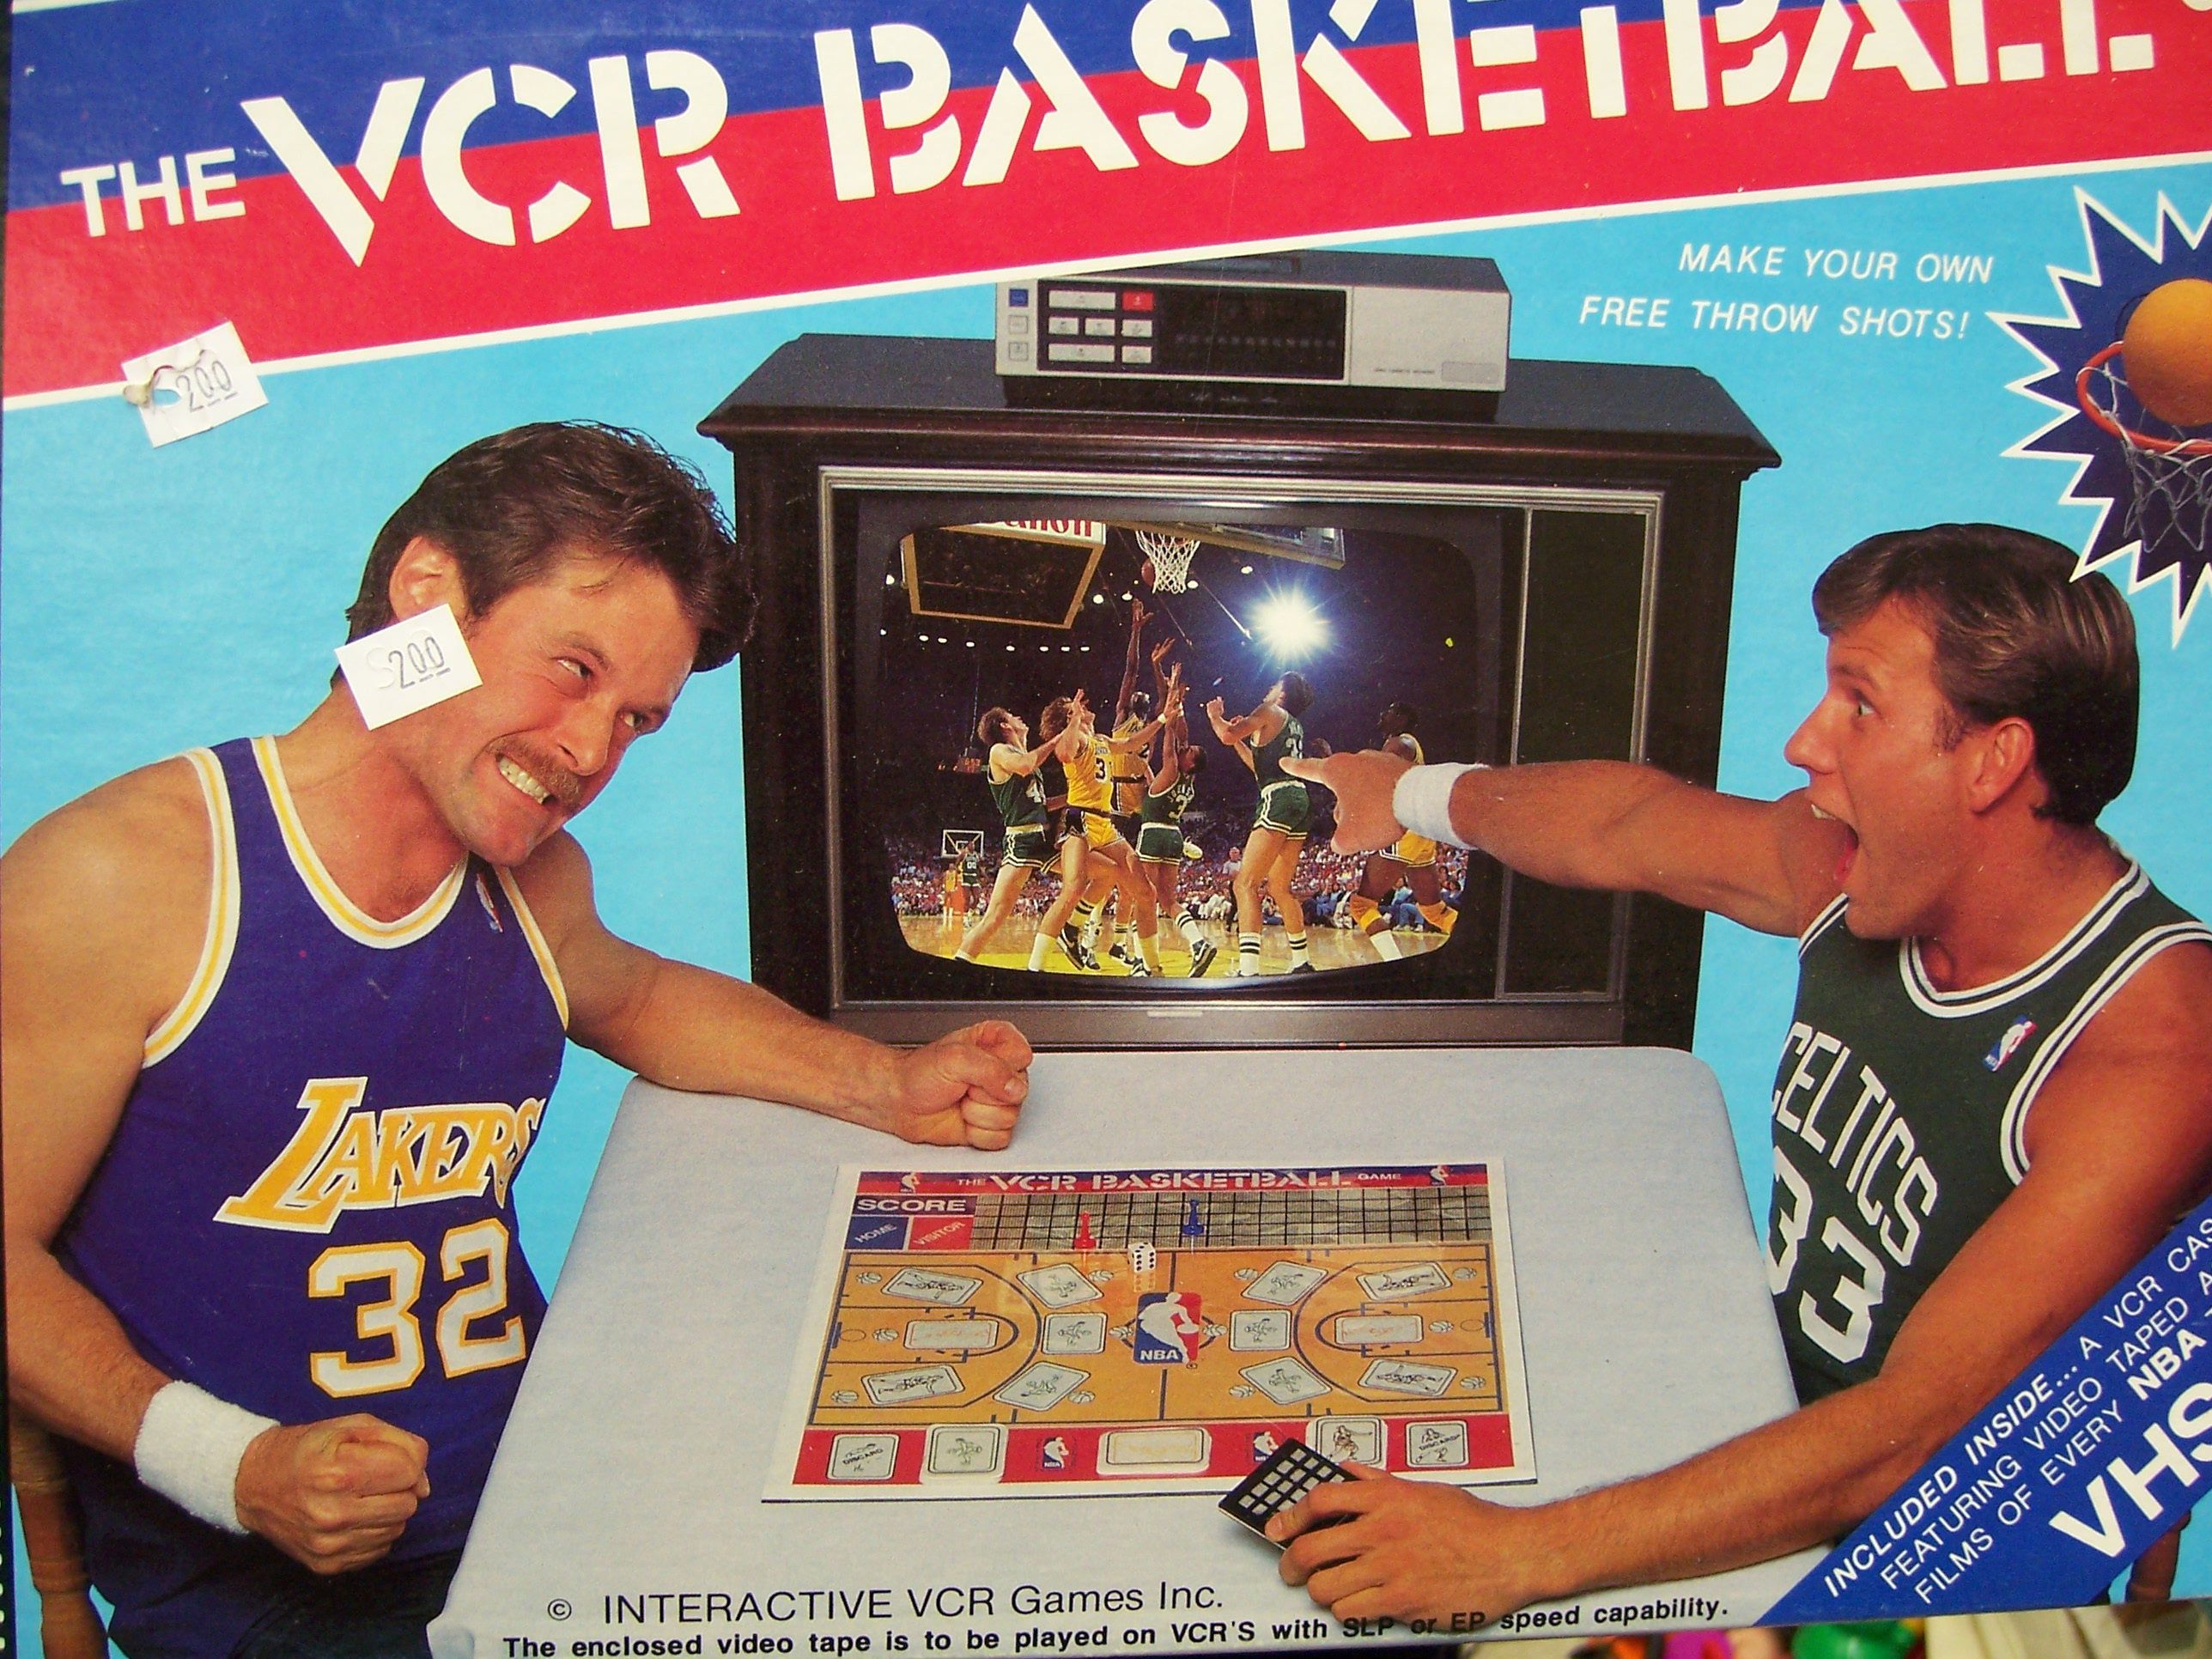 The VCR Basketball Game